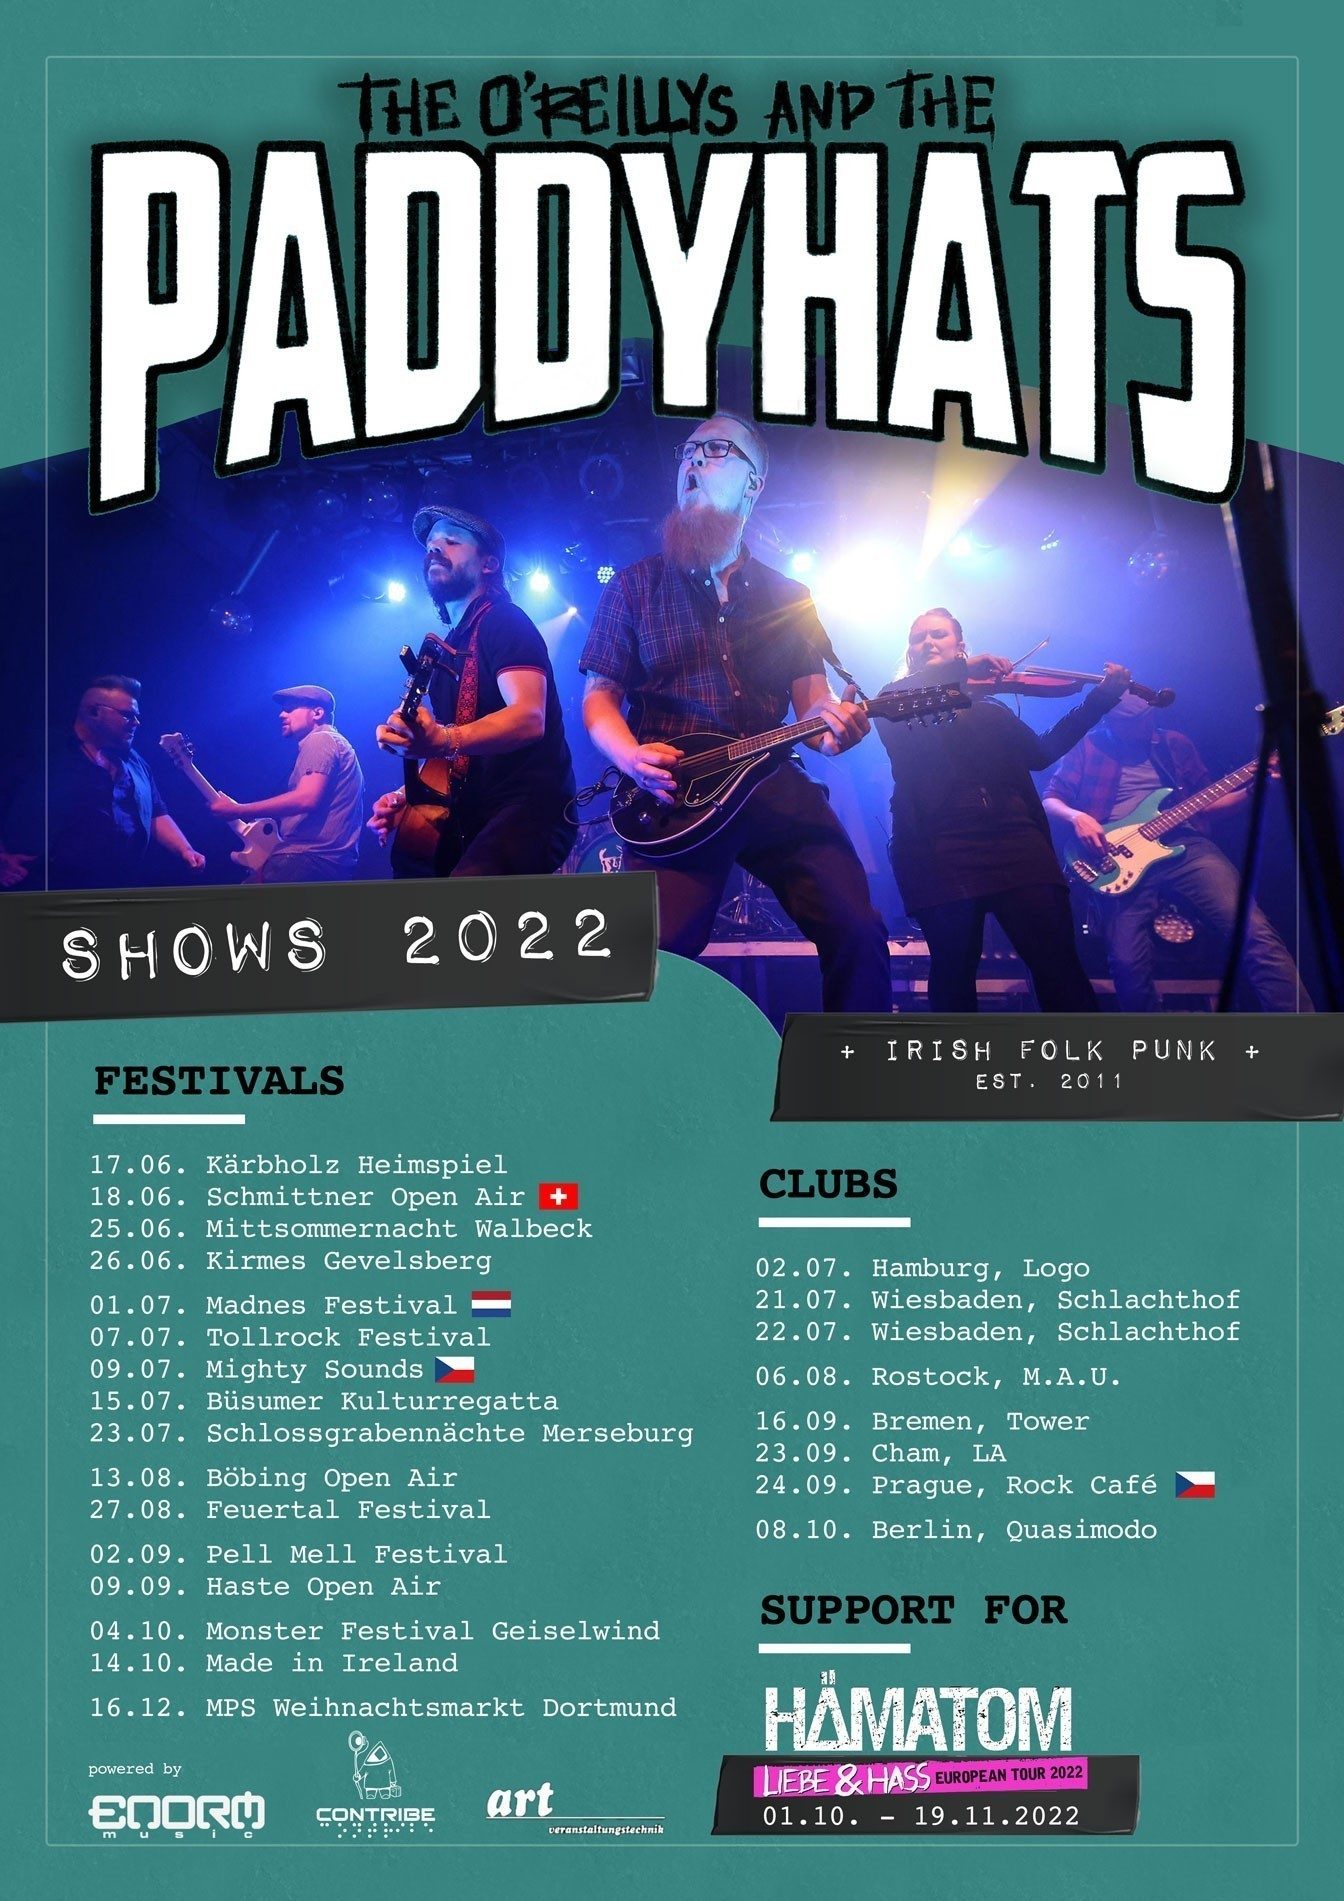 New shows confirmed – Secure tickets now